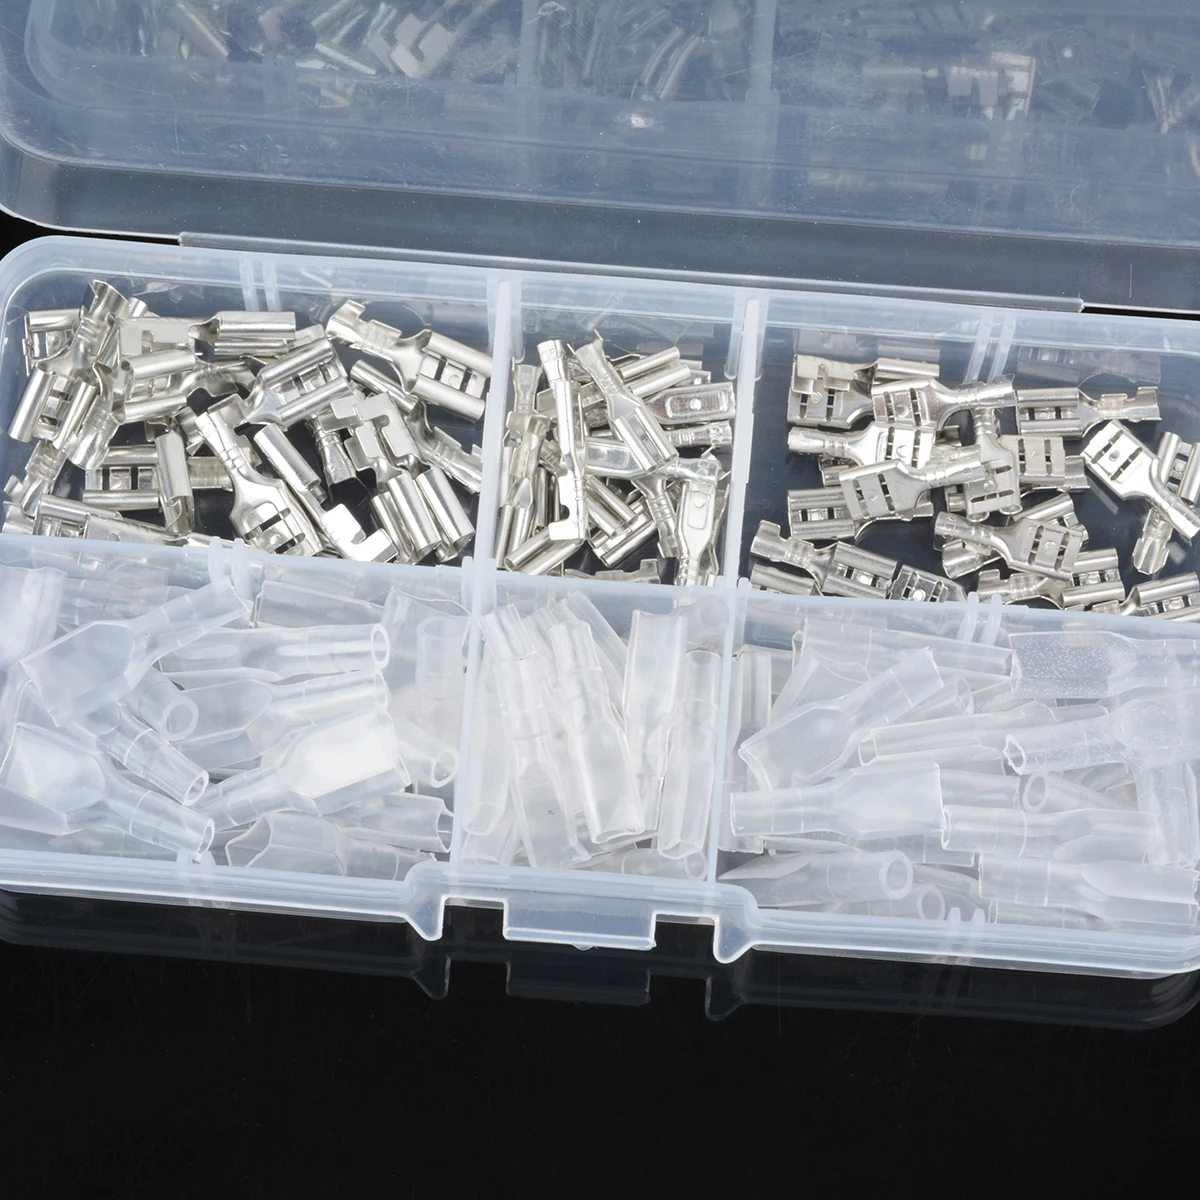 120pcs/Set 2.8mm 4.8mm 6.3mm Female Spade Connectors High Quality Crimp Terminals with Insulating Sleeves